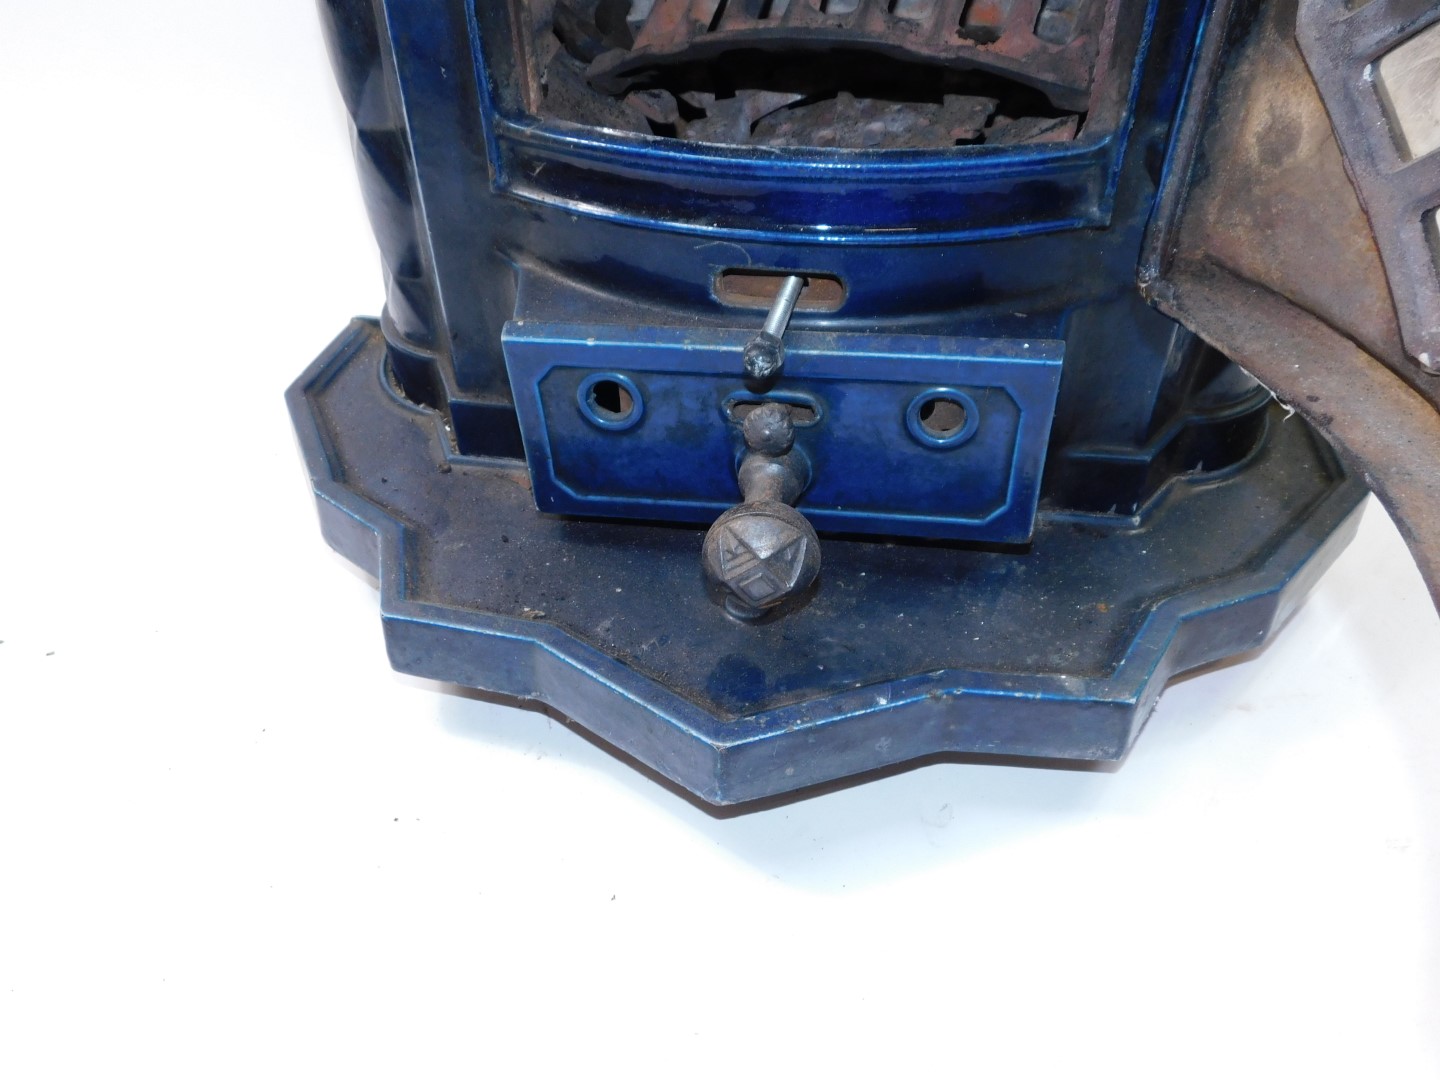 A Deville & Cie of Charleville cast iron and blue enamel Cristal wood burning stove, c1920, with a - Image 3 of 4